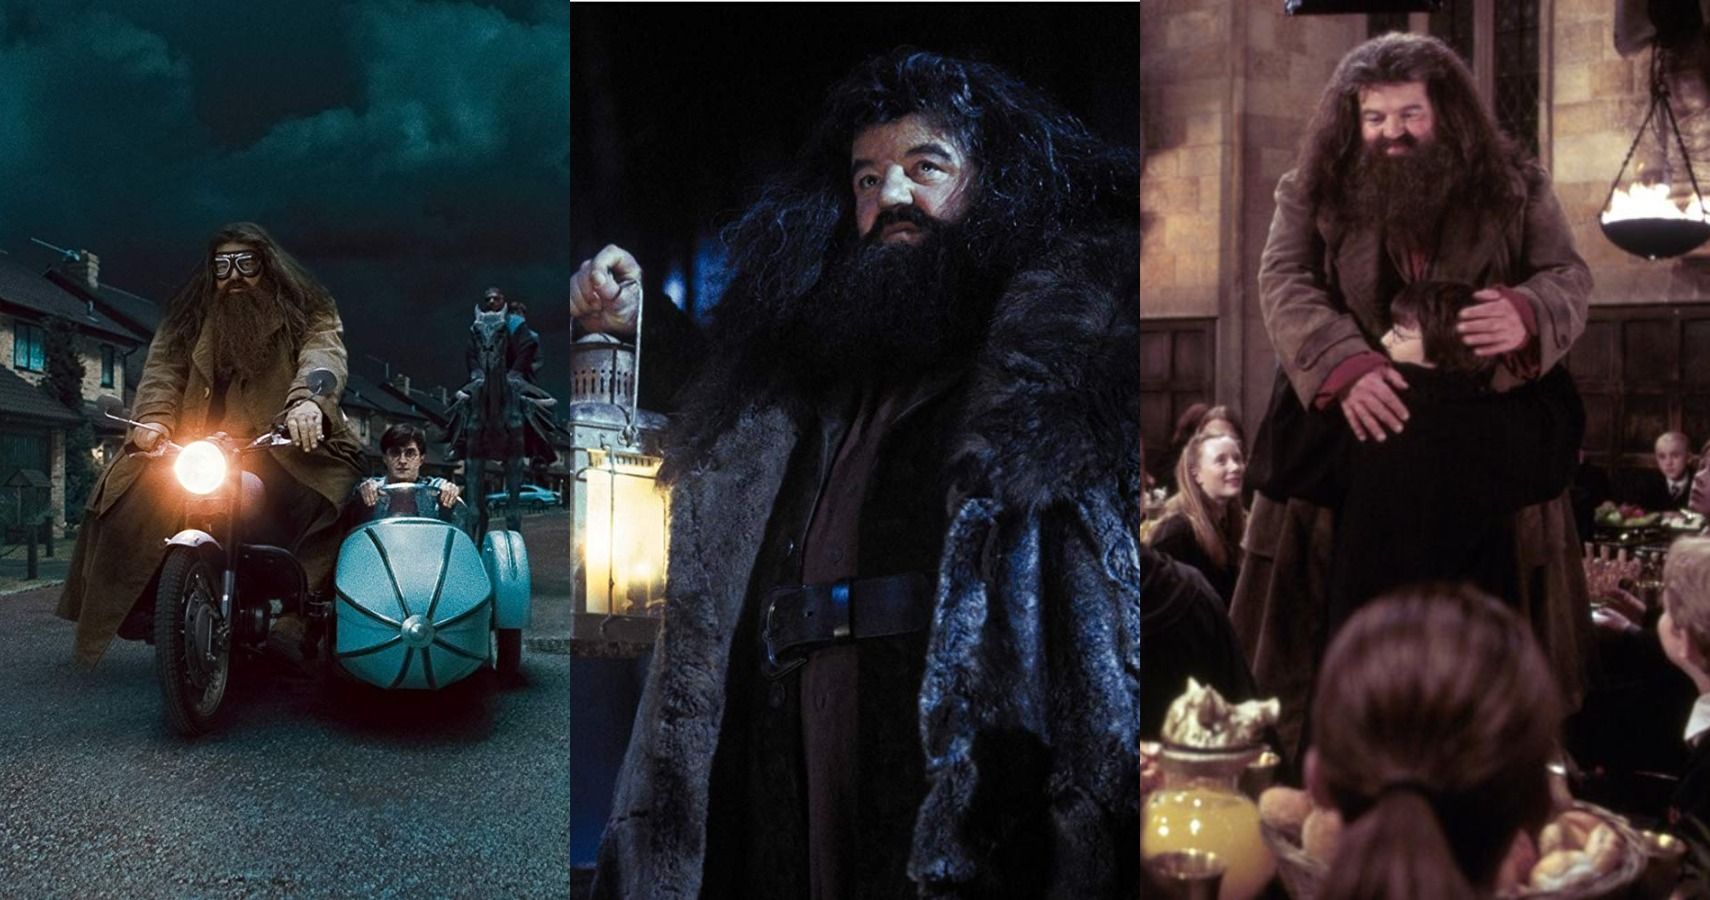 Harry Potter: 10 Biggest Ways Hagrid Changed From Philosopher's Stone